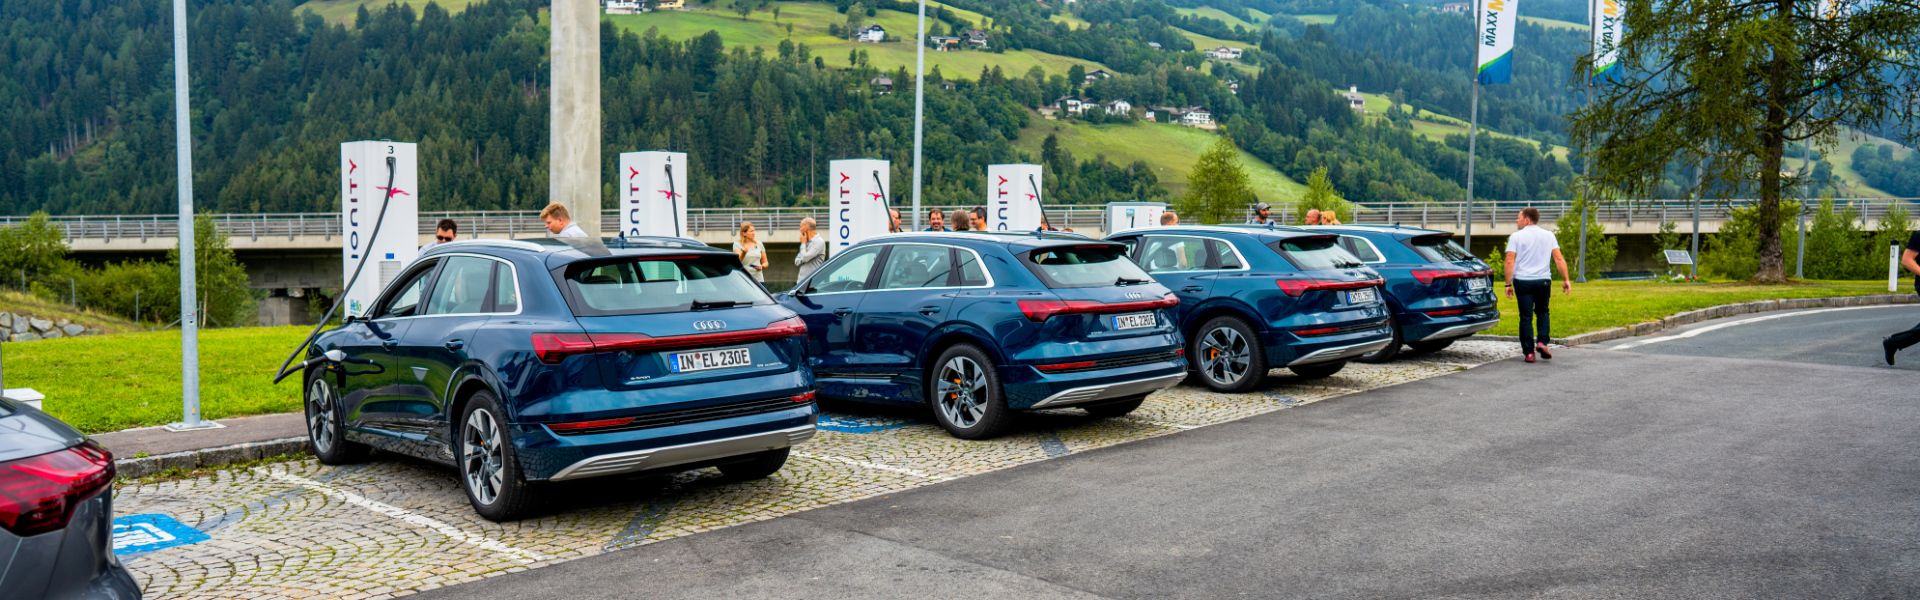 The e-tron extreme tour through Europe in numbers: